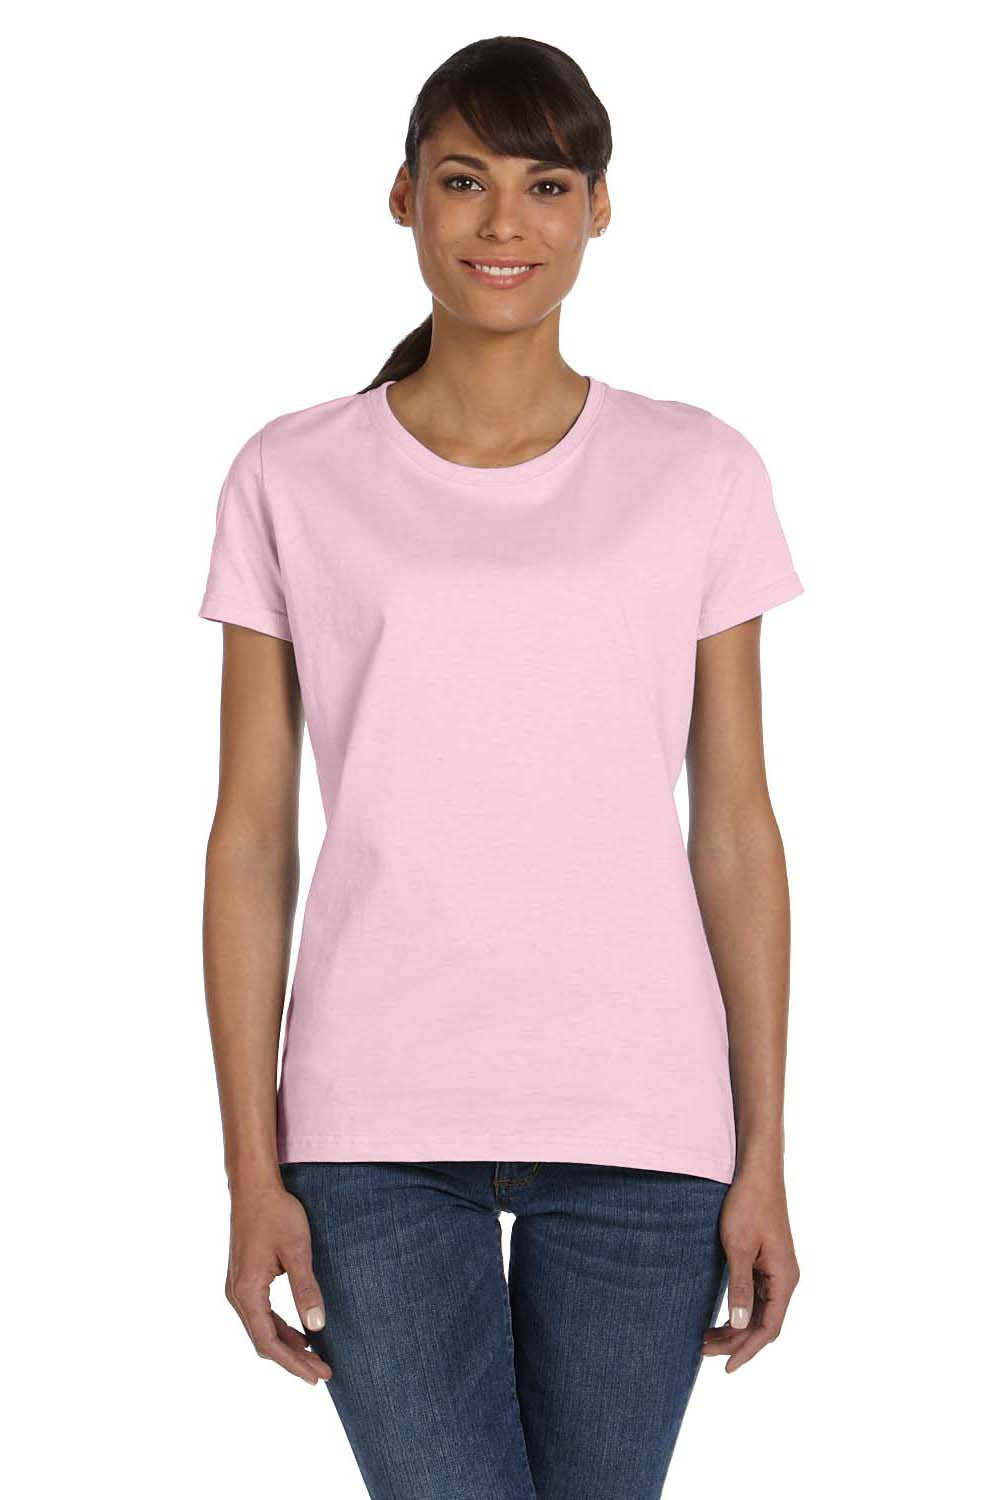 Fruit Of The Loom L3930R Womens HD Jersey Short Sleeve Crewneck T-Shirt Classic Pink Front